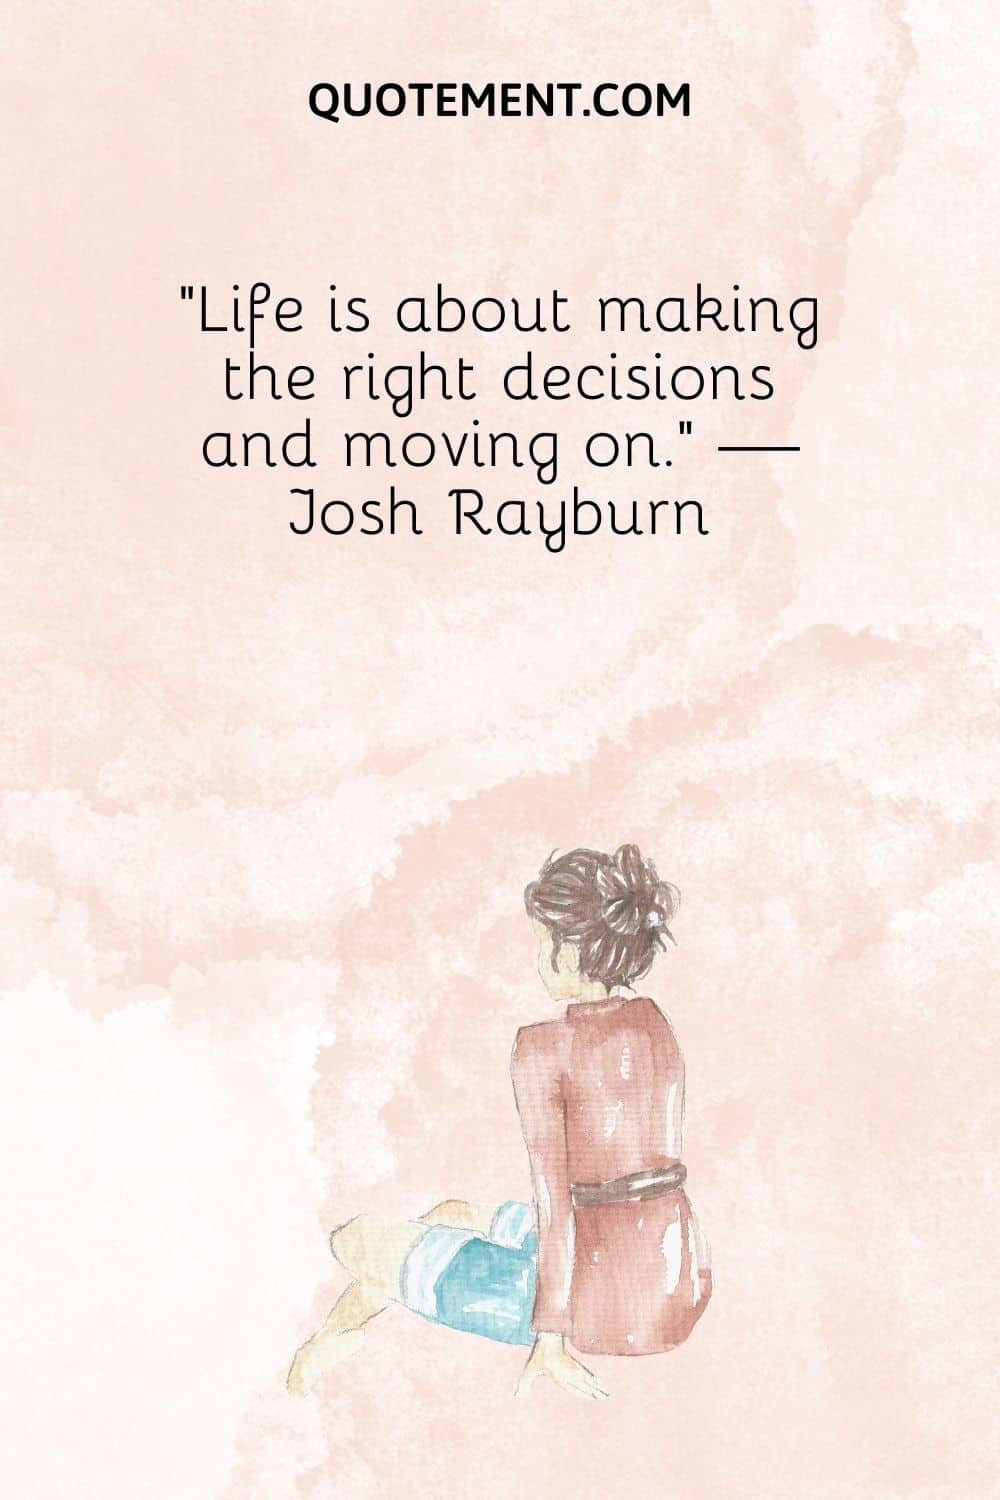 Life is about making the right decisions and moving on